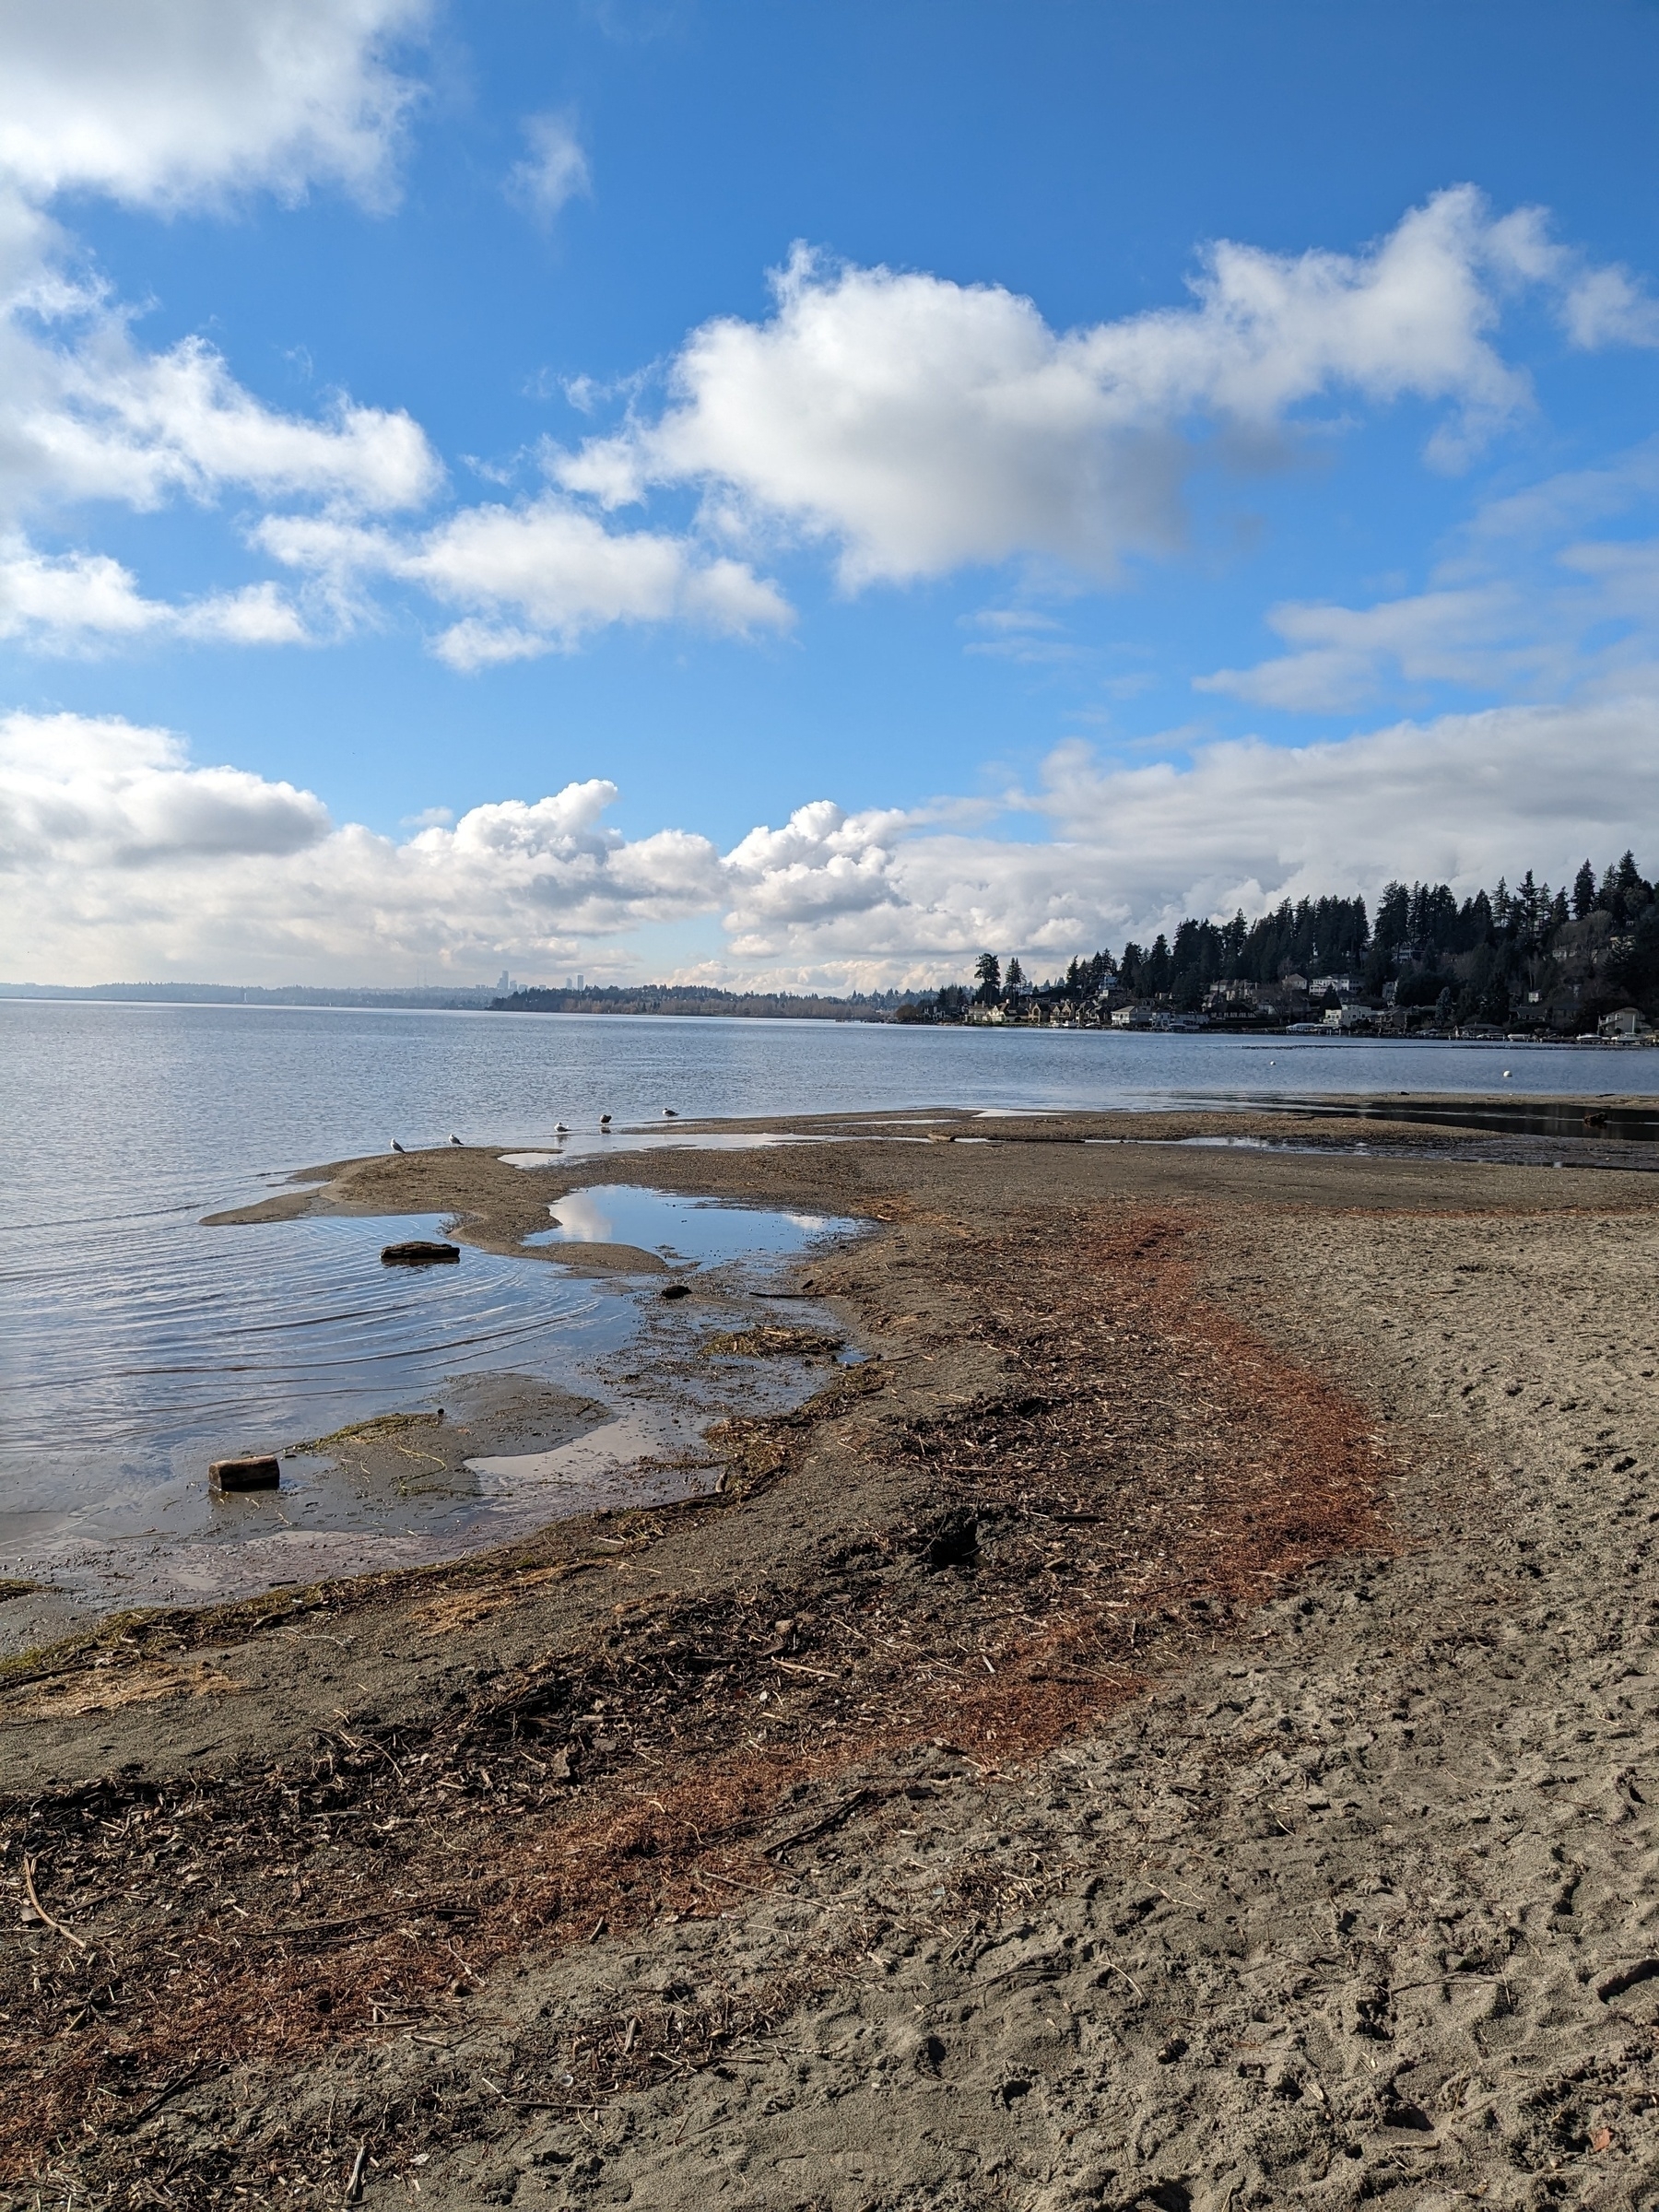 a few seagulls wade in shallow water at the lake edge on a sunny day with puffy clouds, Seattle hazy in the distance 